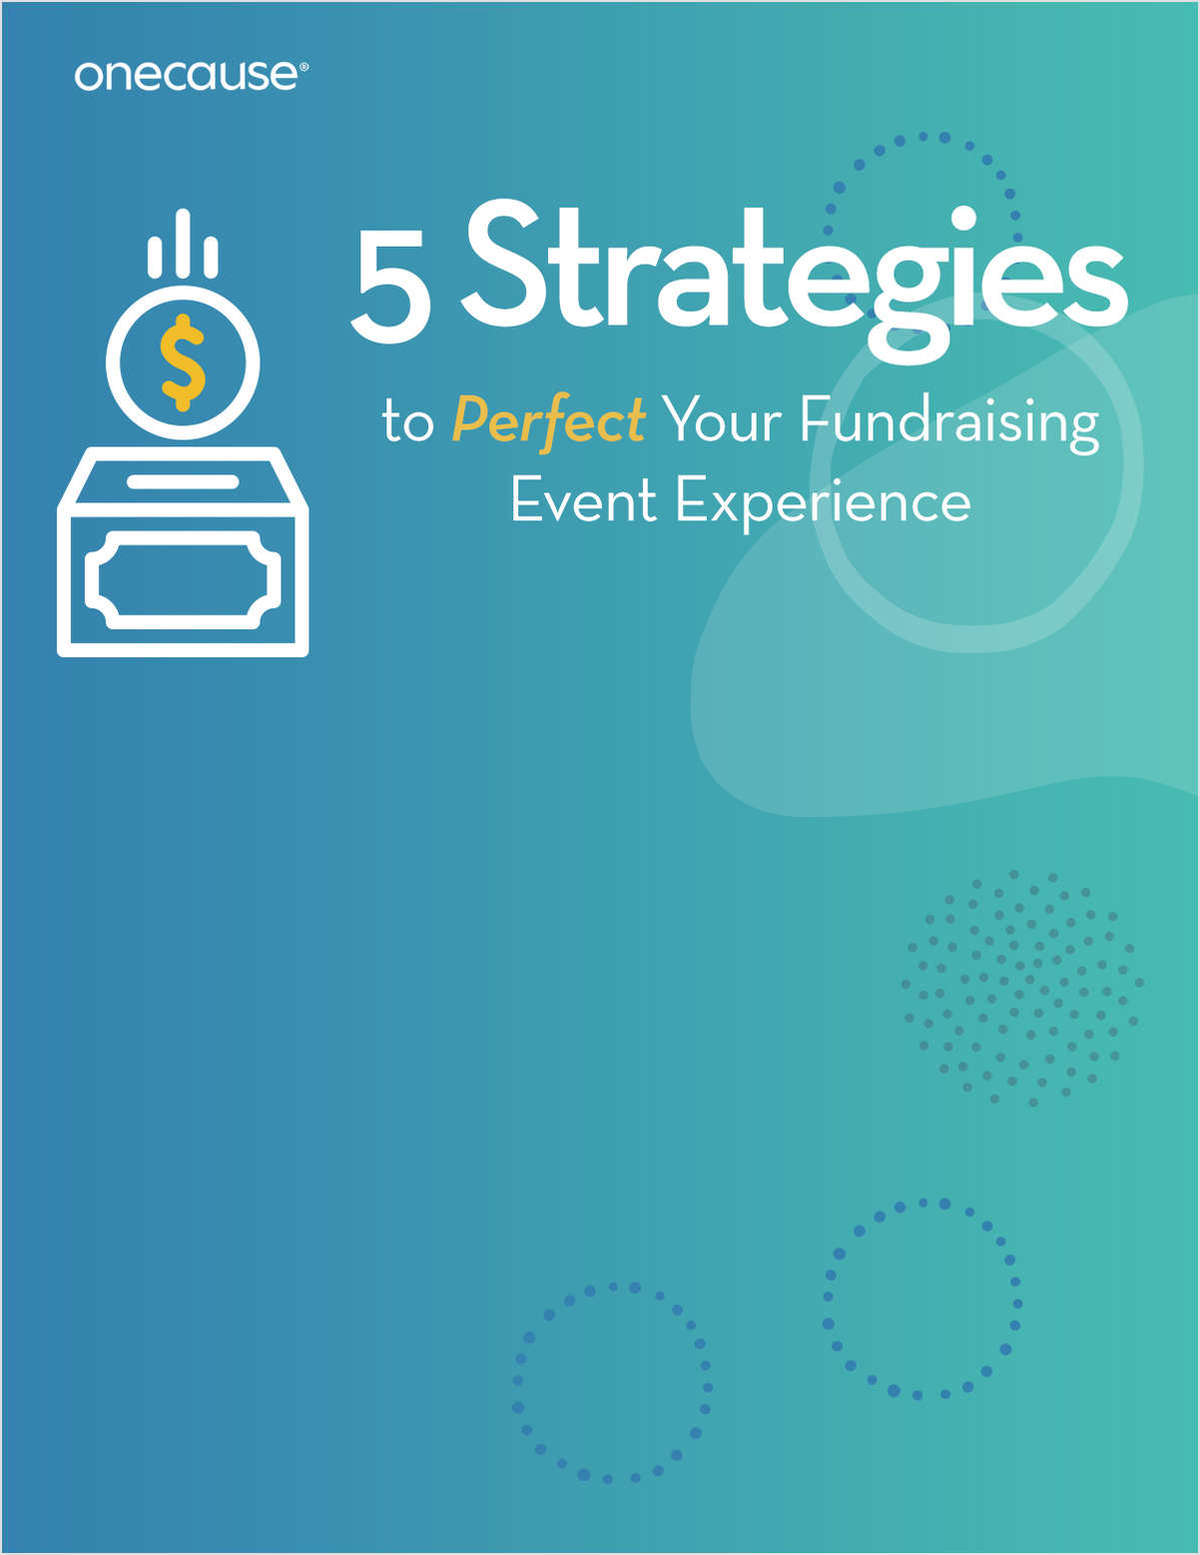 5 Strategies to Perfect your Fundraising Event Experience